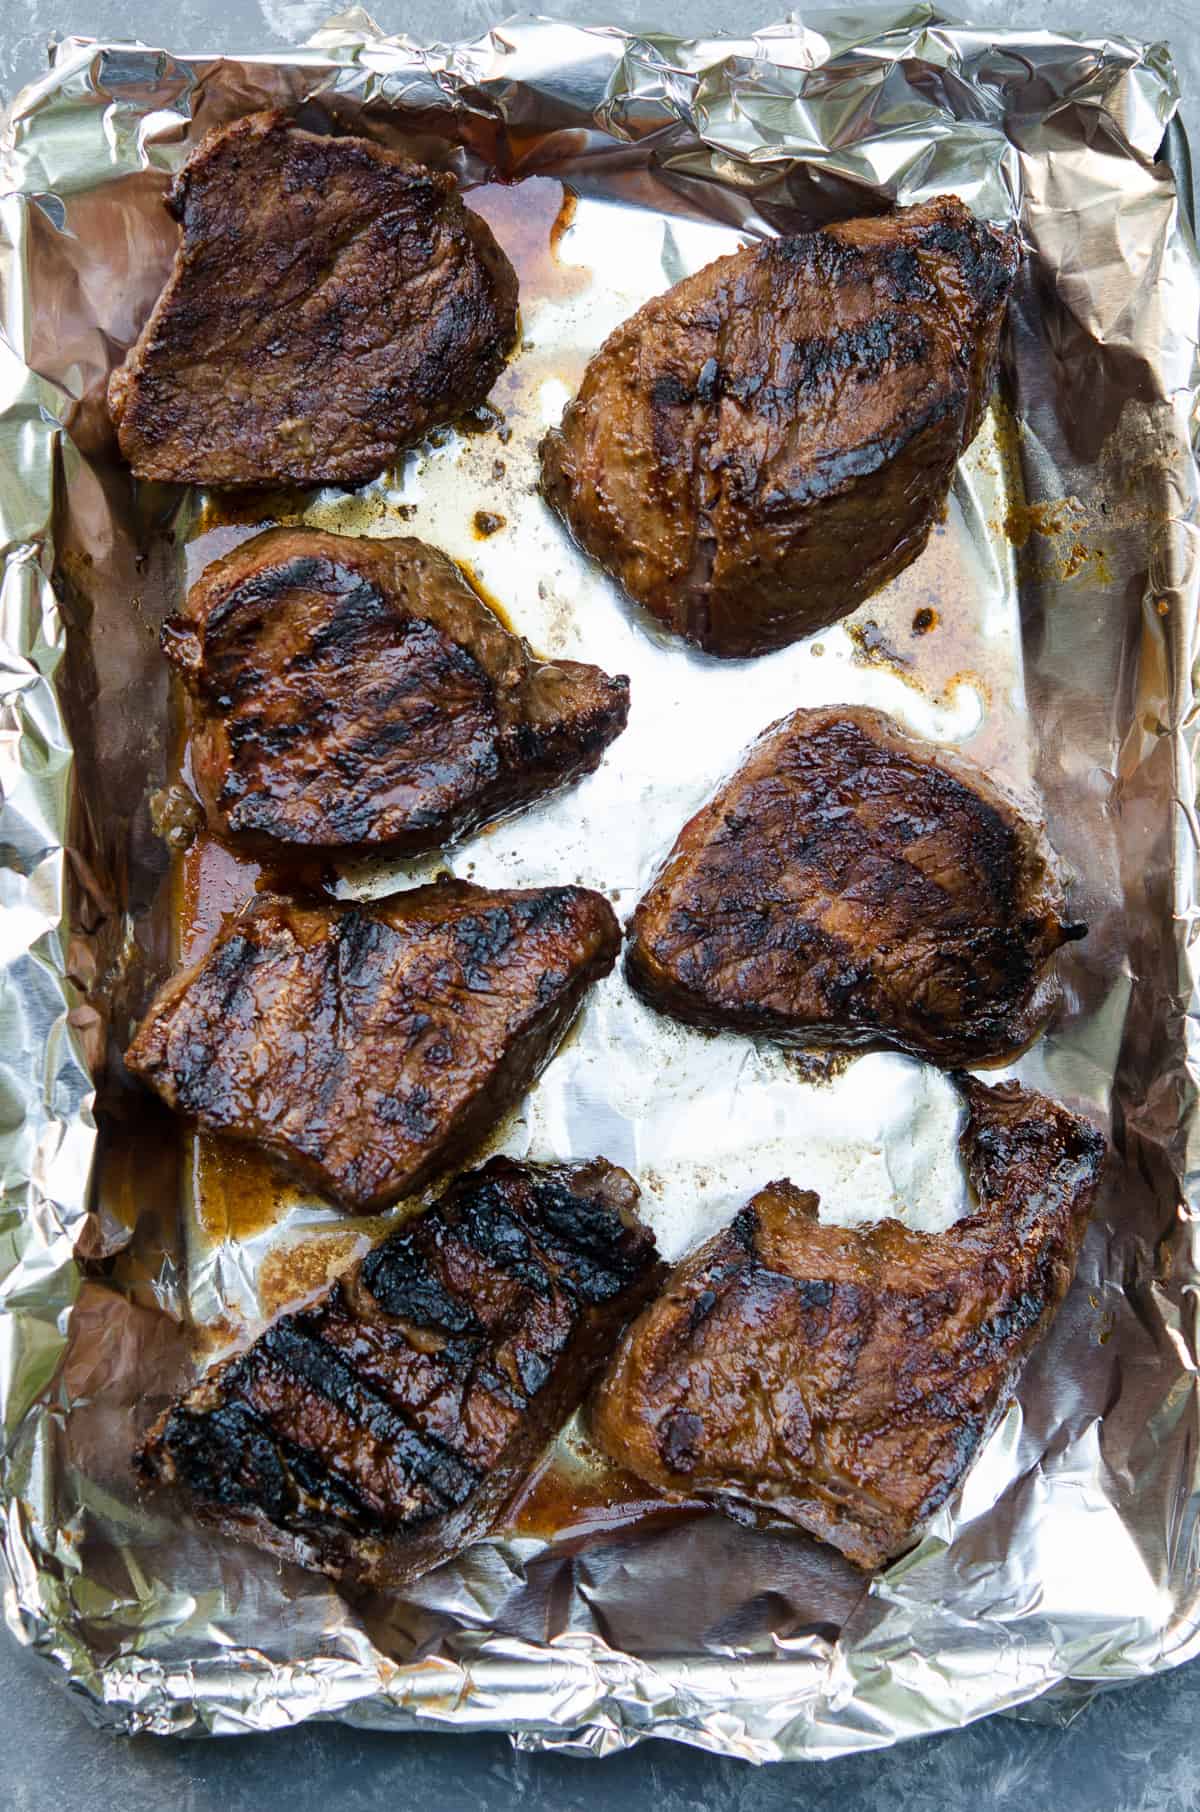 A top down shot of grilled sirloin steak on a foil lined baking sheet.